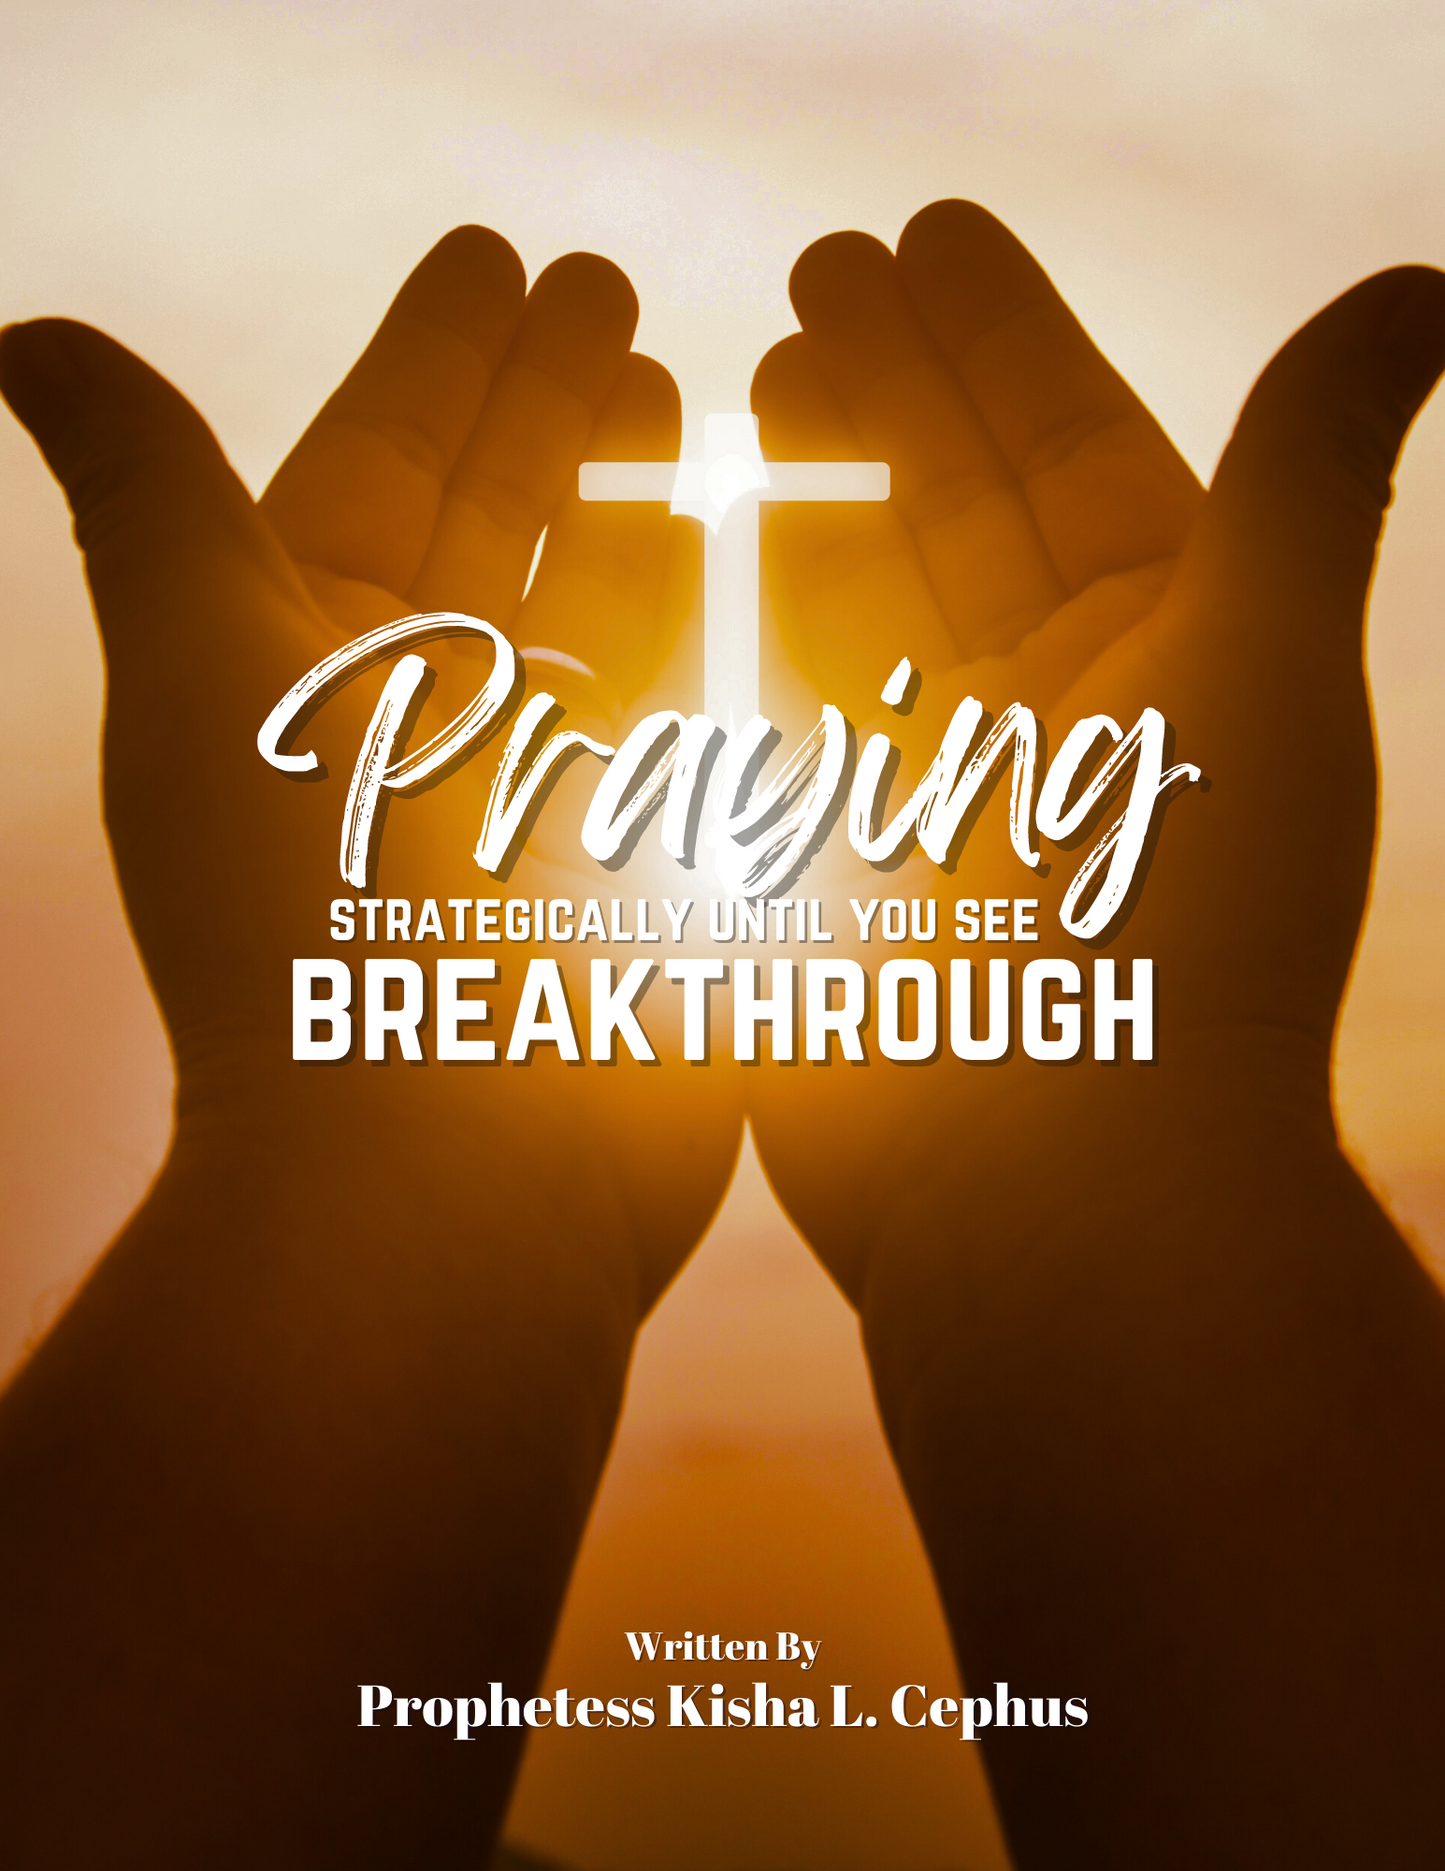 (E-book) Praying Strategically Until You See Breakthrough